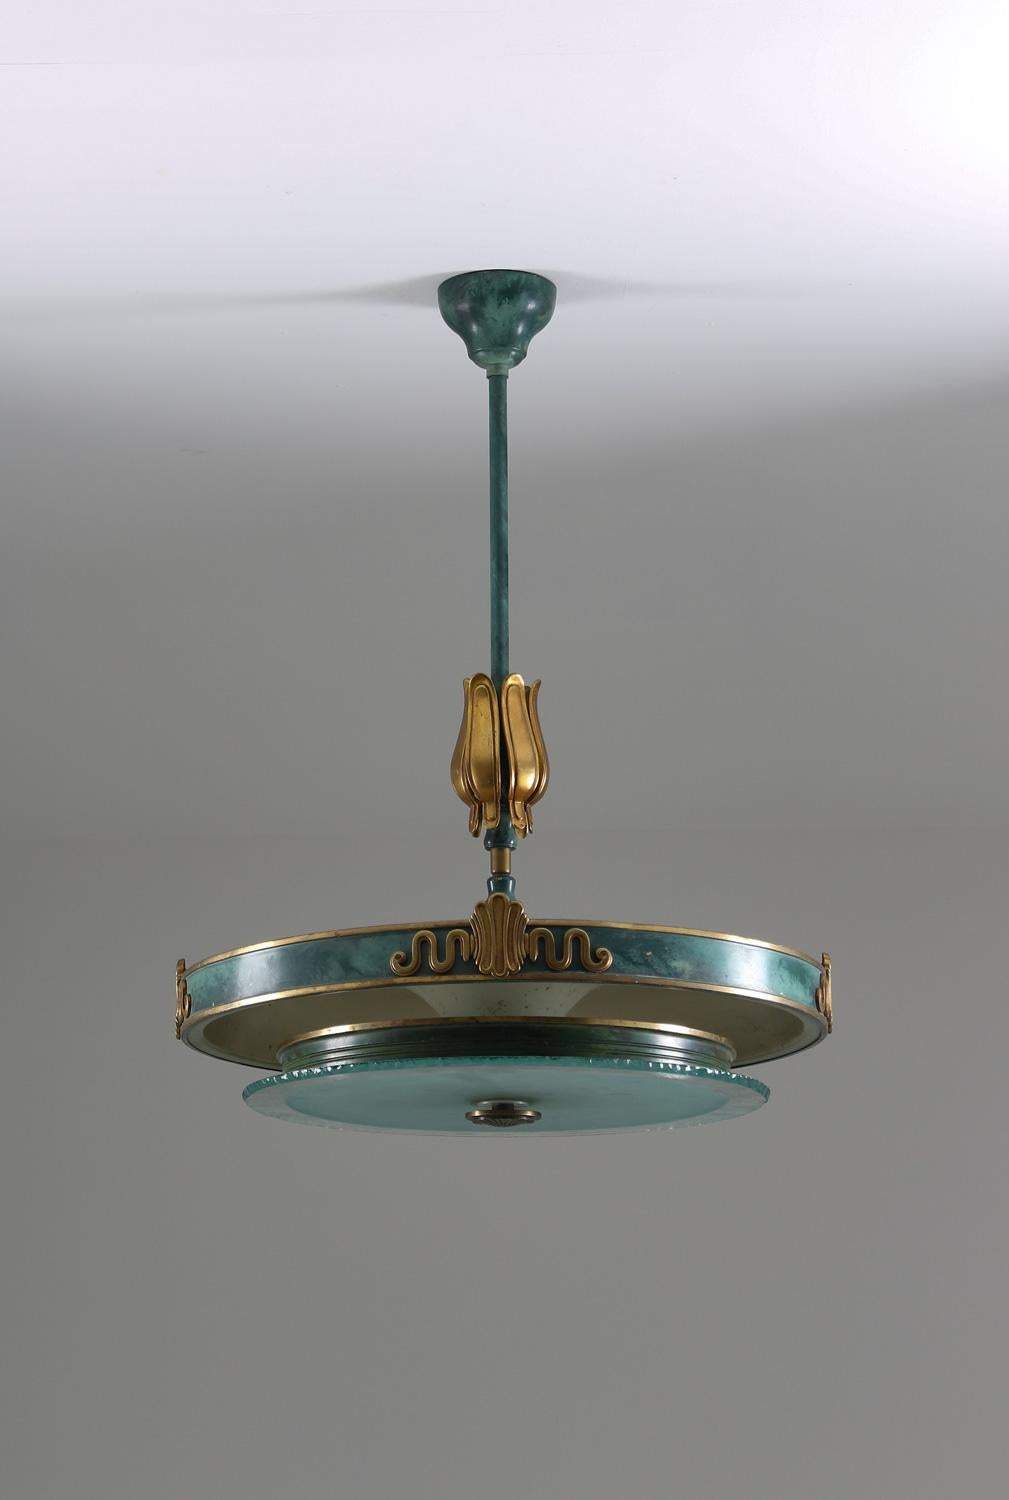 Pendant in frosted glass and patinated brass, possibly made by Böhlmarks, Sweden, 1930s.
This large pendant was made during the Swedish grace era; an era when truly high-quality objects were produced in Sweden. The lamp features seven light